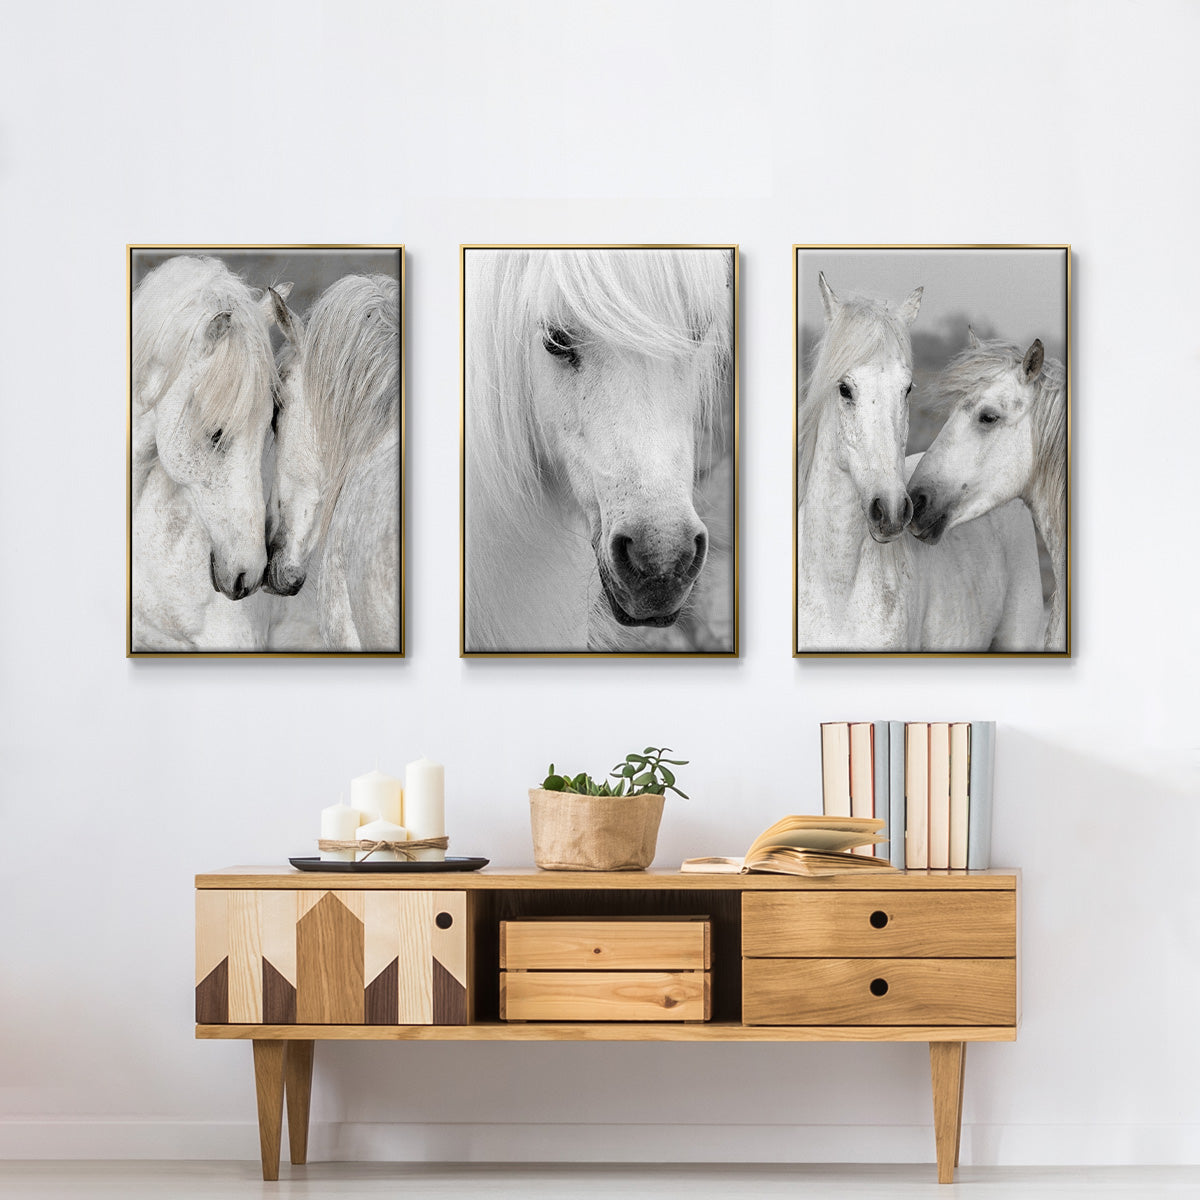 Affection I - Framed Premium Gallery Wrapped Canvas L Frame 3 Piece Set - Ready to Hang